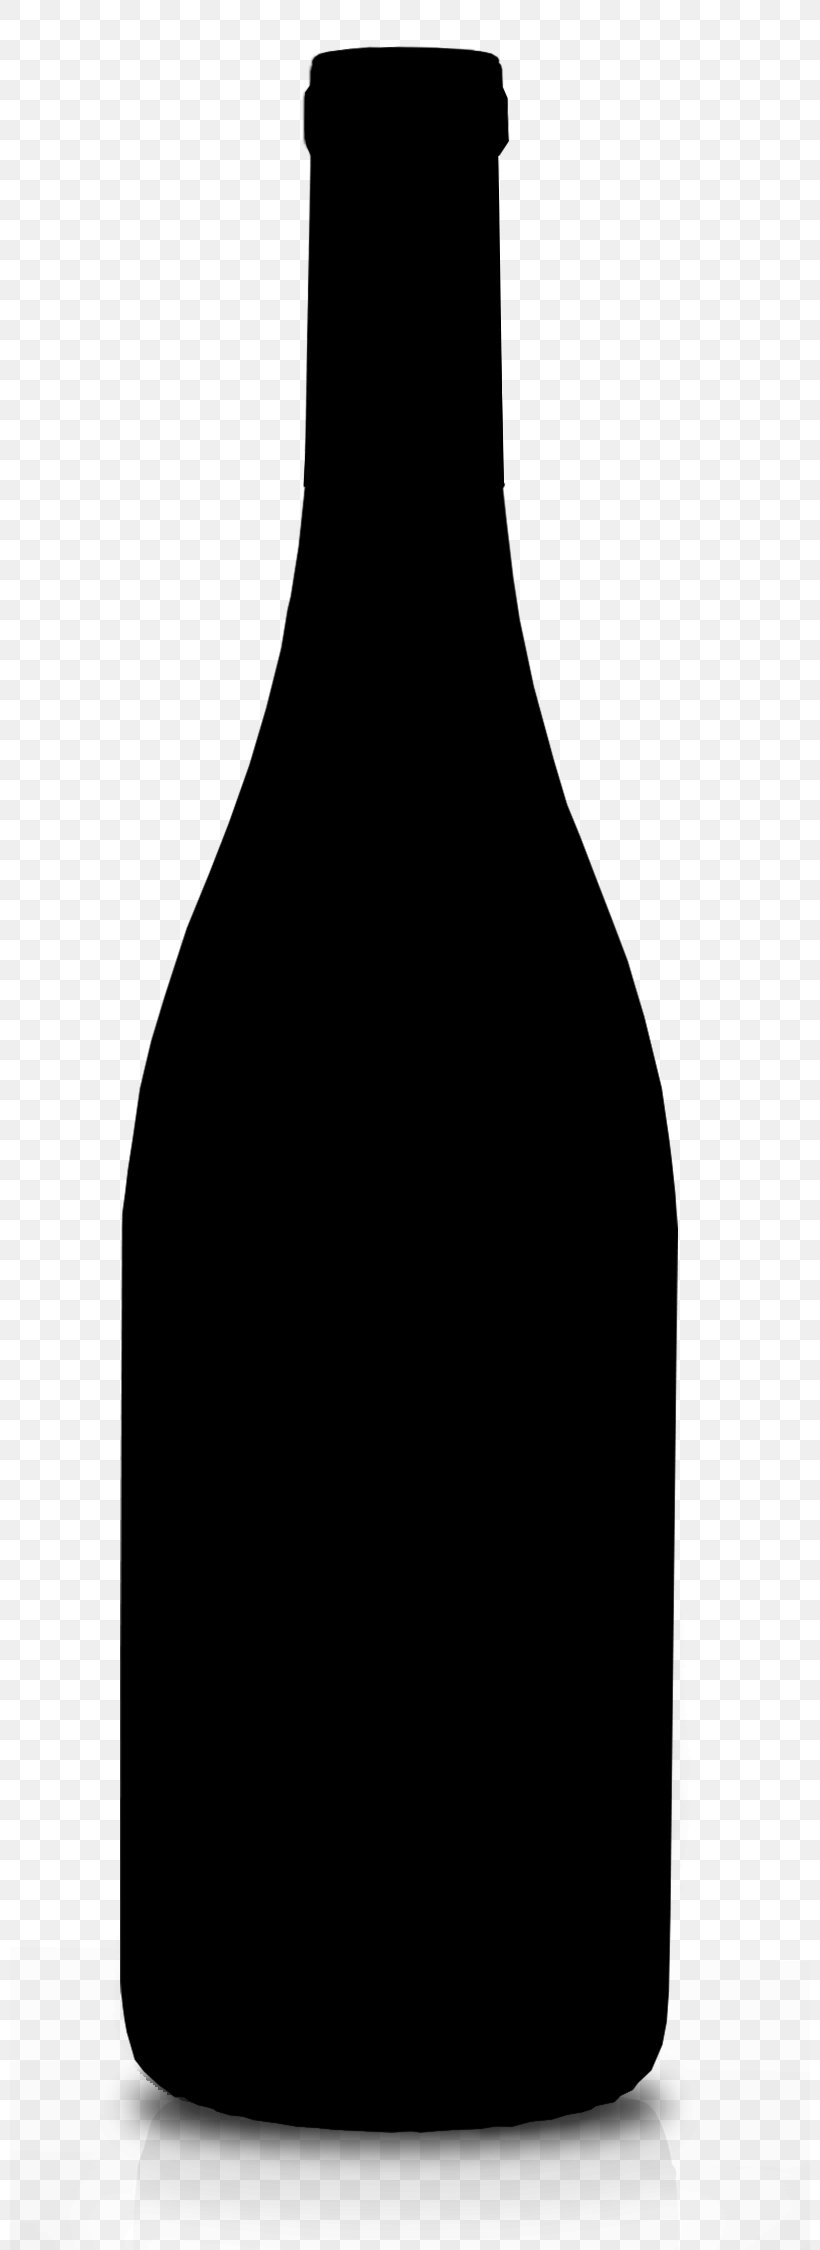 Glass Bottle Beer Vector Graphics Image, PNG, 800x2250px, Glass Bottle, Alcohol, Beer, Beer Bottle, Beer Glasses Download Free